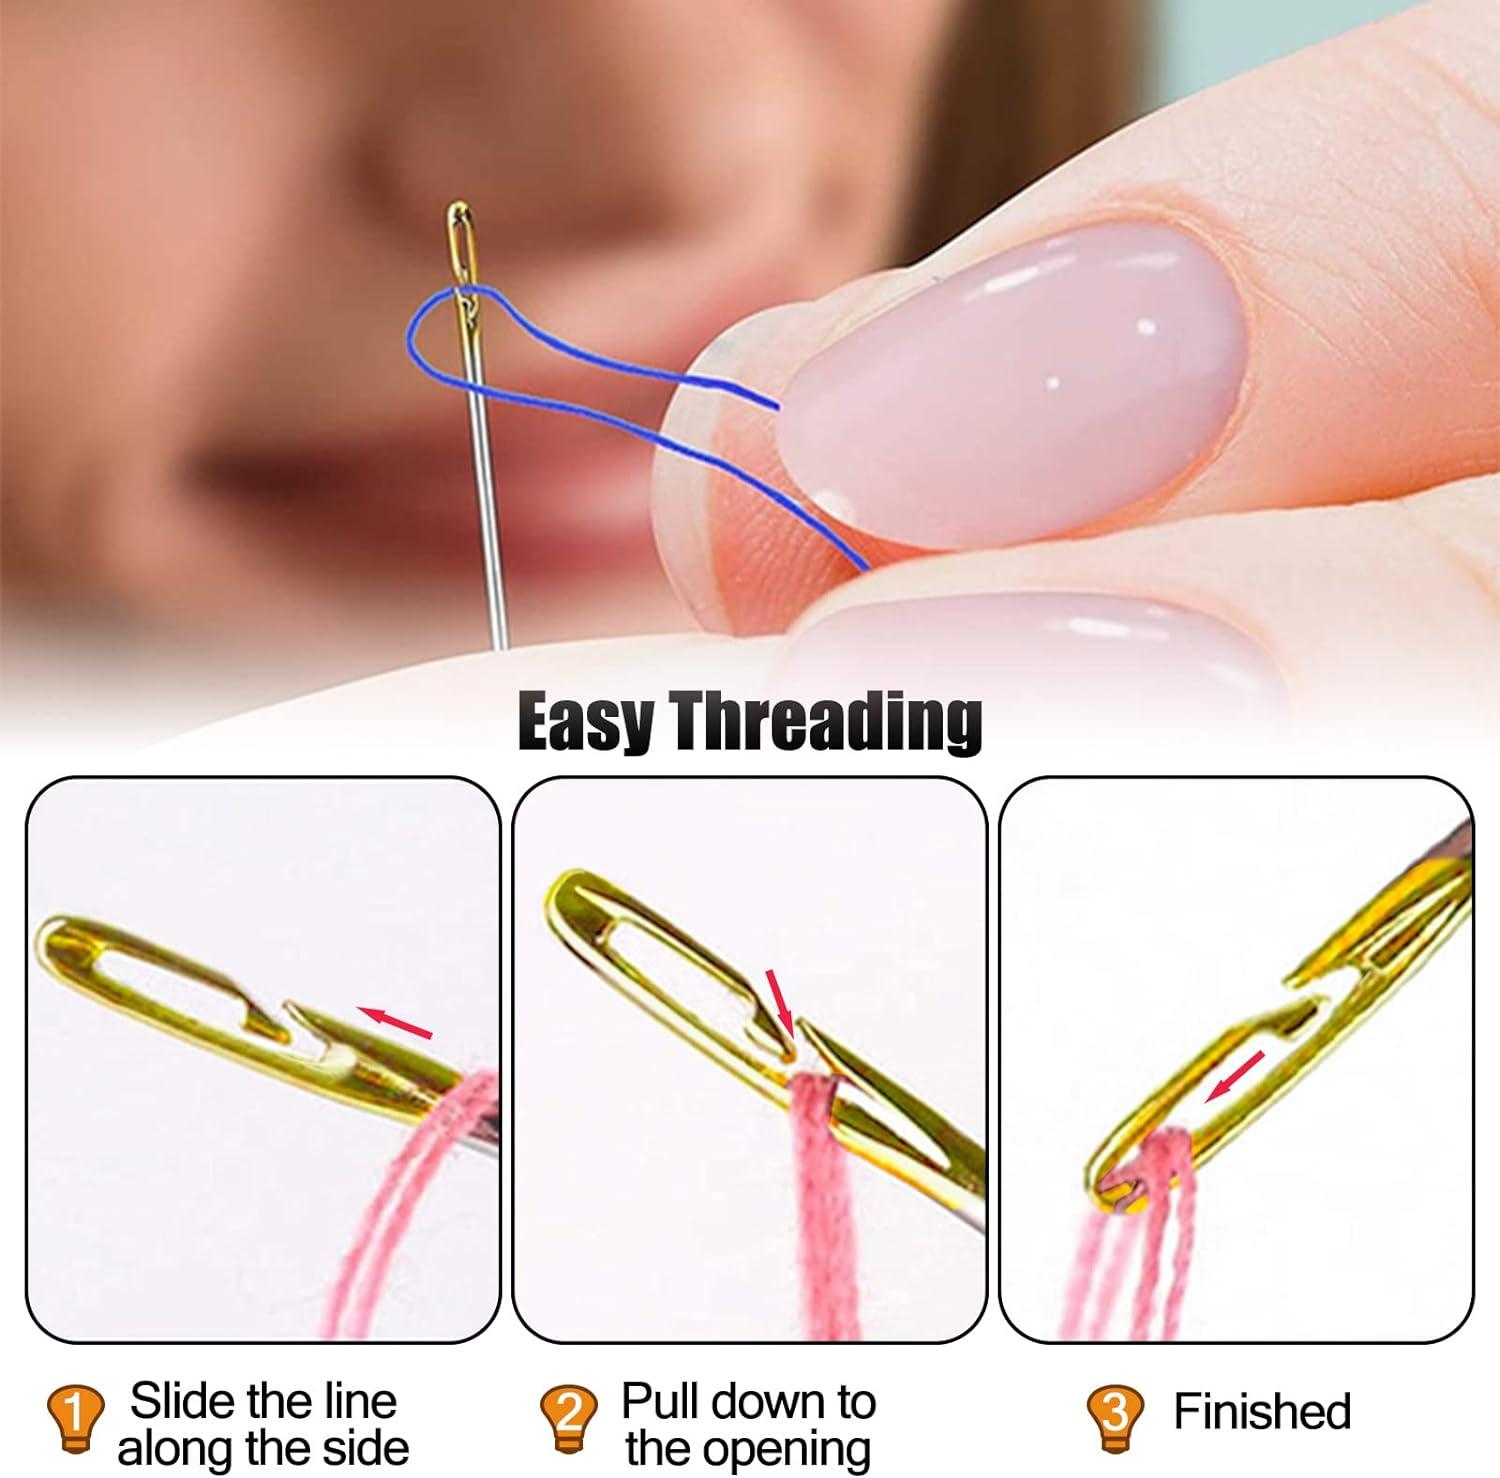 Self Threading Needles for Hand Sewing - 24 Pieces Easy Thread Needles Hand  Embroidery Needles for Quilting Stitch Side Threading Hand Sewing Needles  with Wood Case Carving Pattern - YAWALL